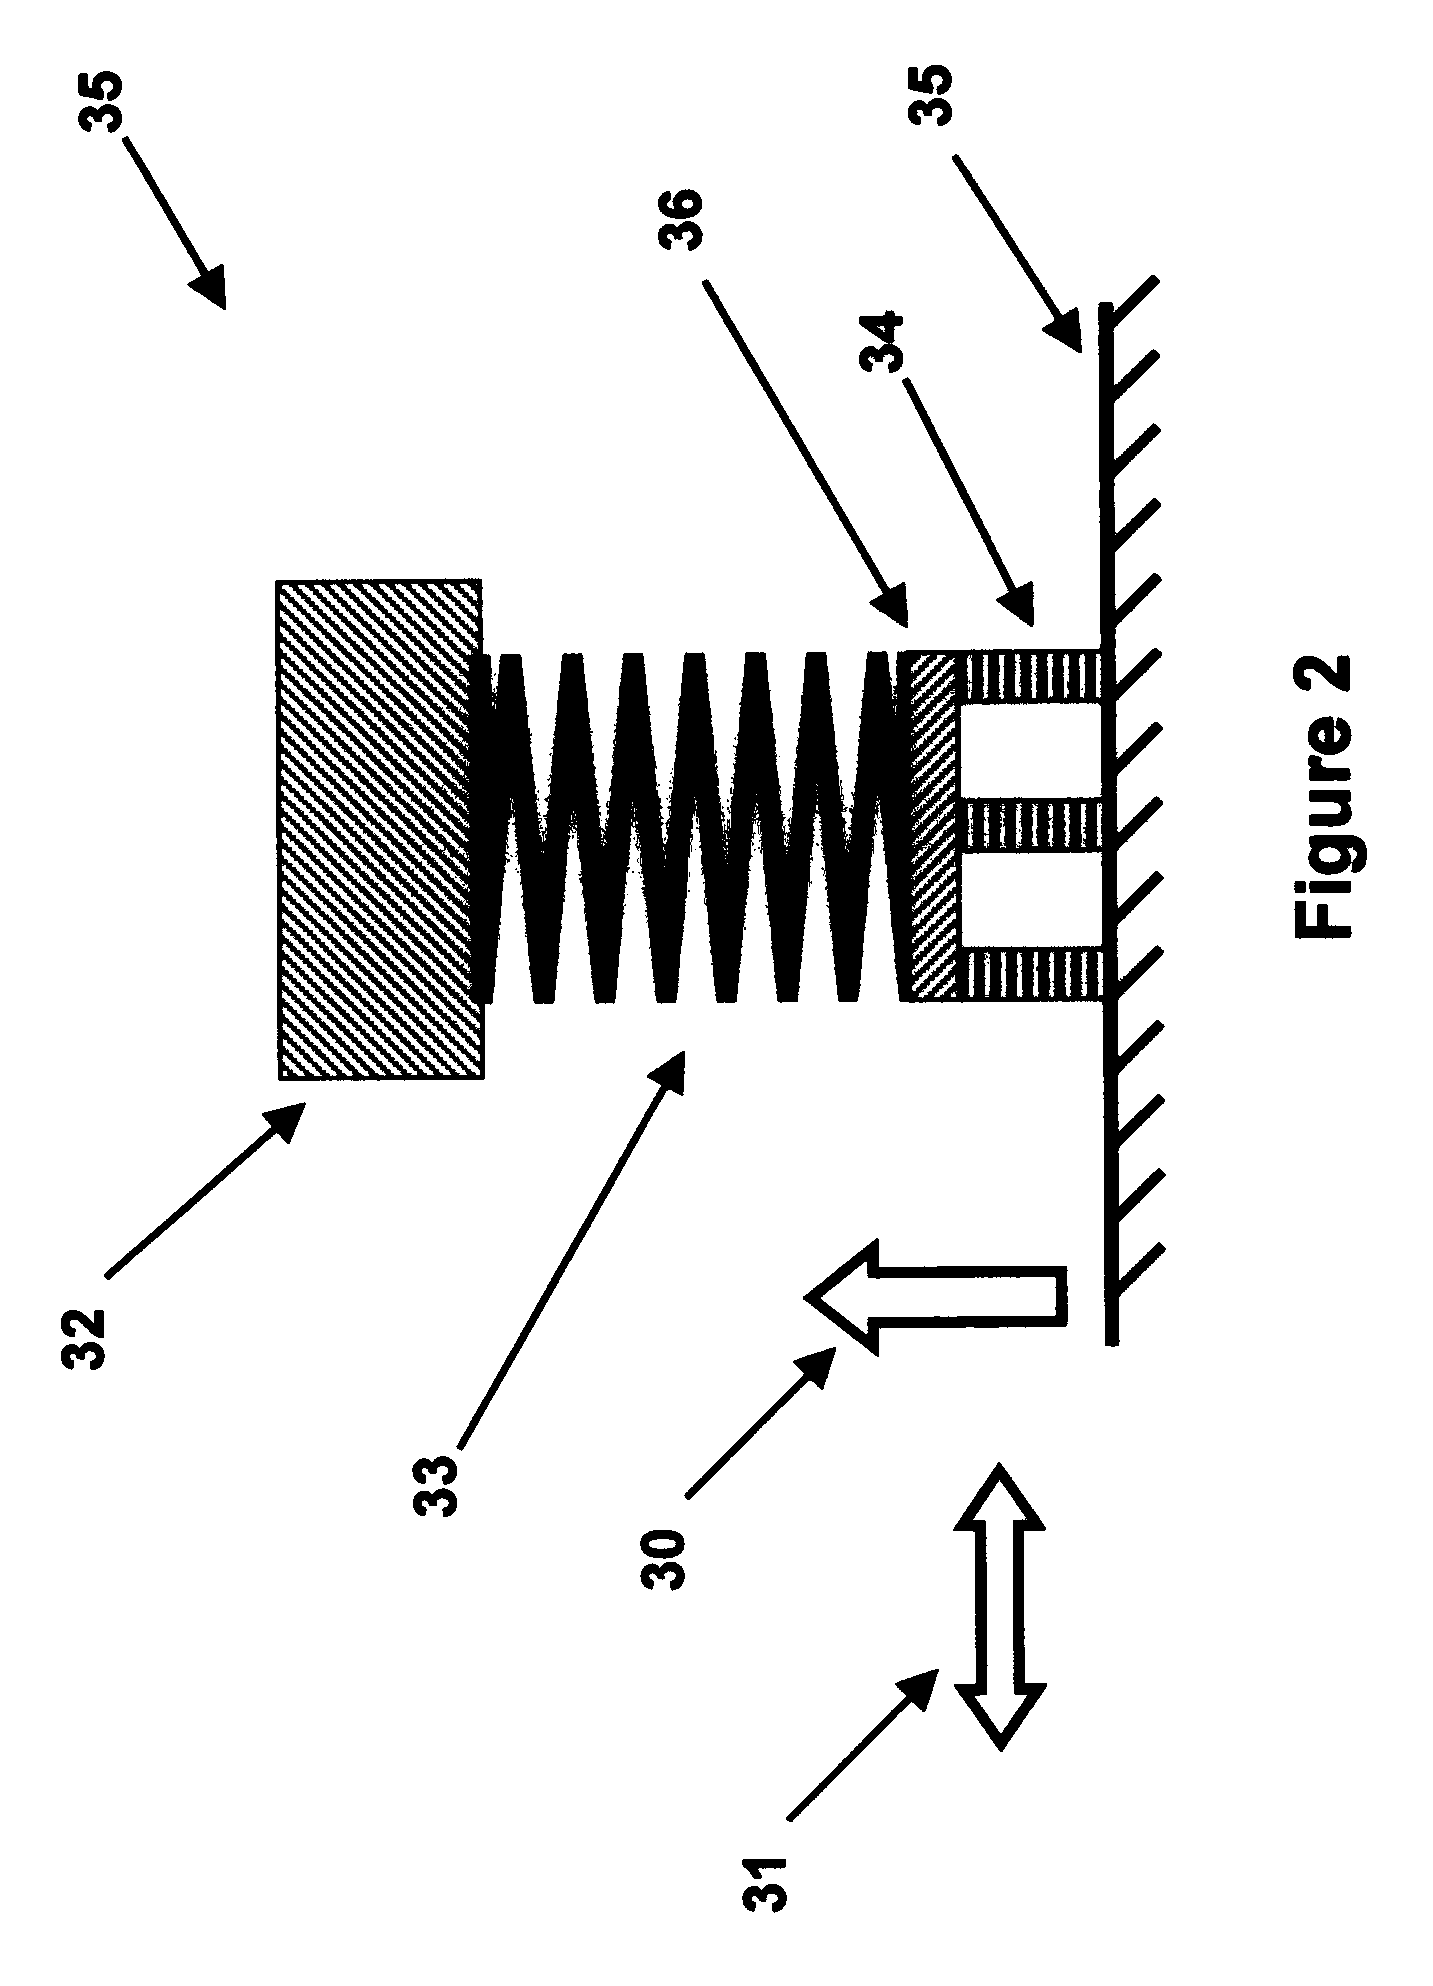 Methods and apparatus for mechanical reserve power sources for gun-fired munitions, mortars, and gravity dropped weapons